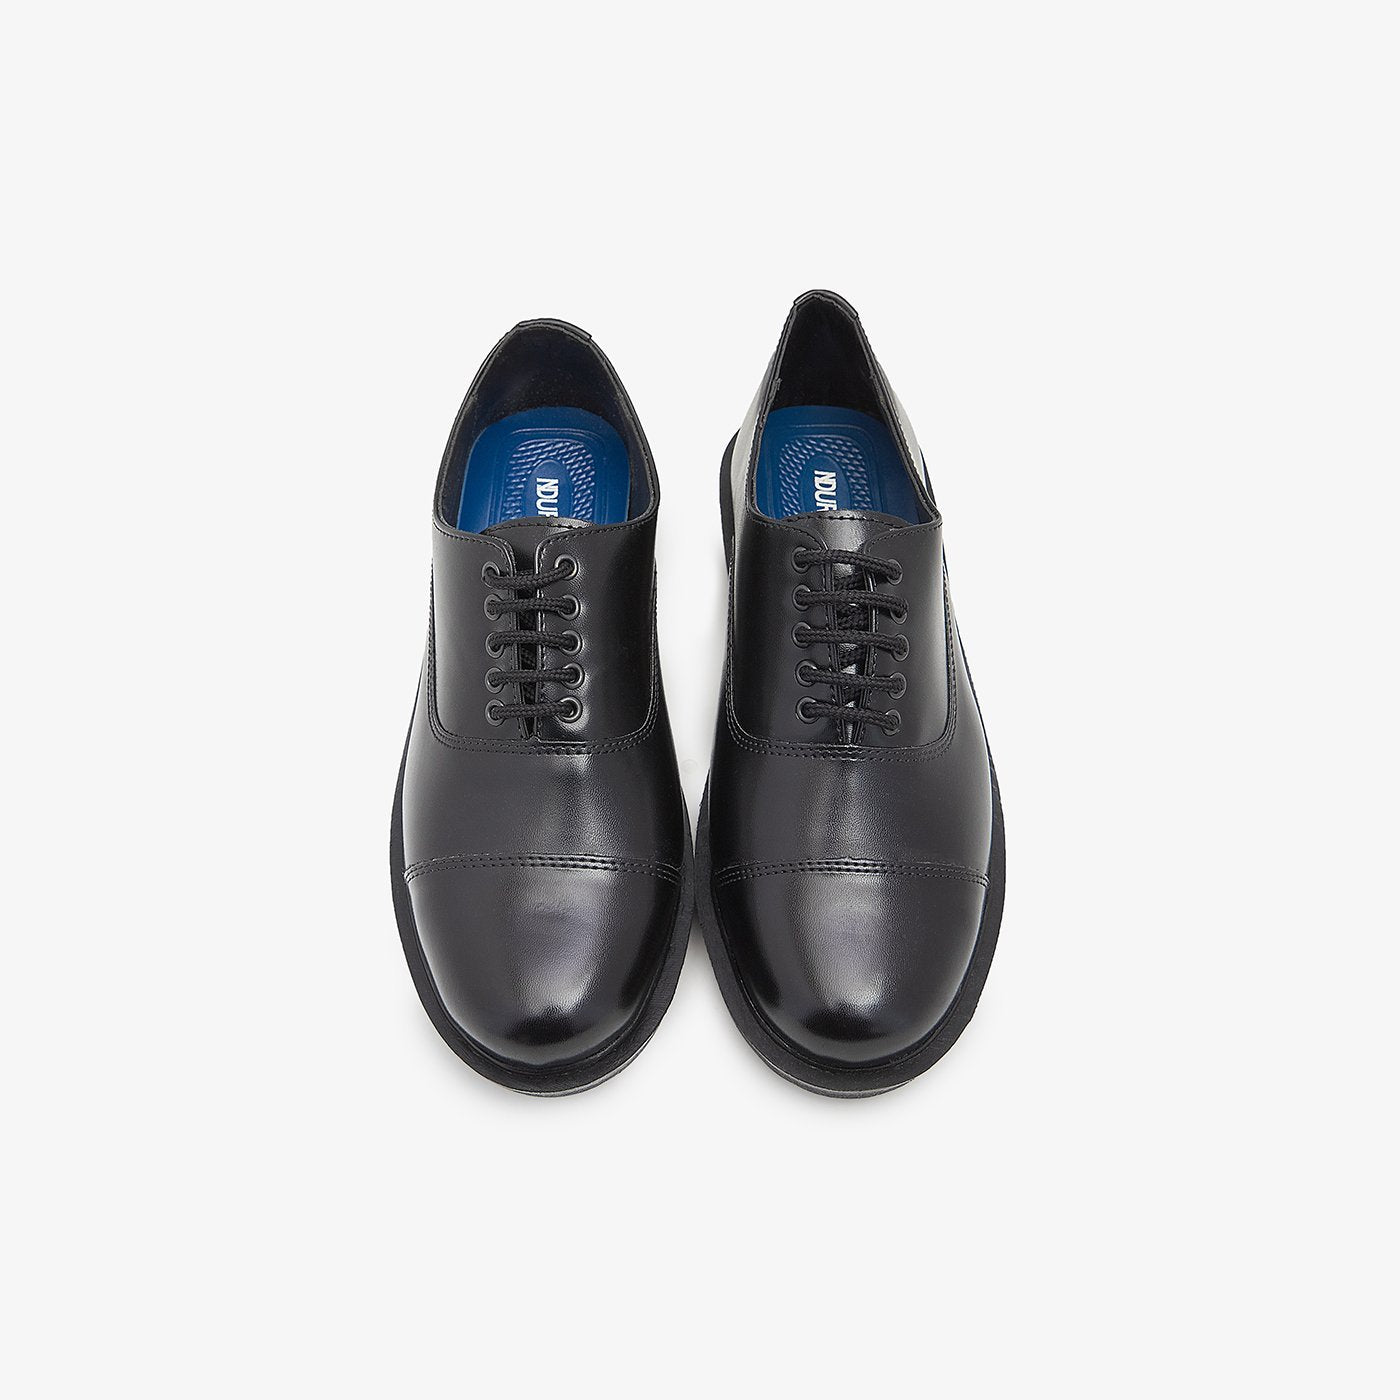 Classic Lace-ups for Men